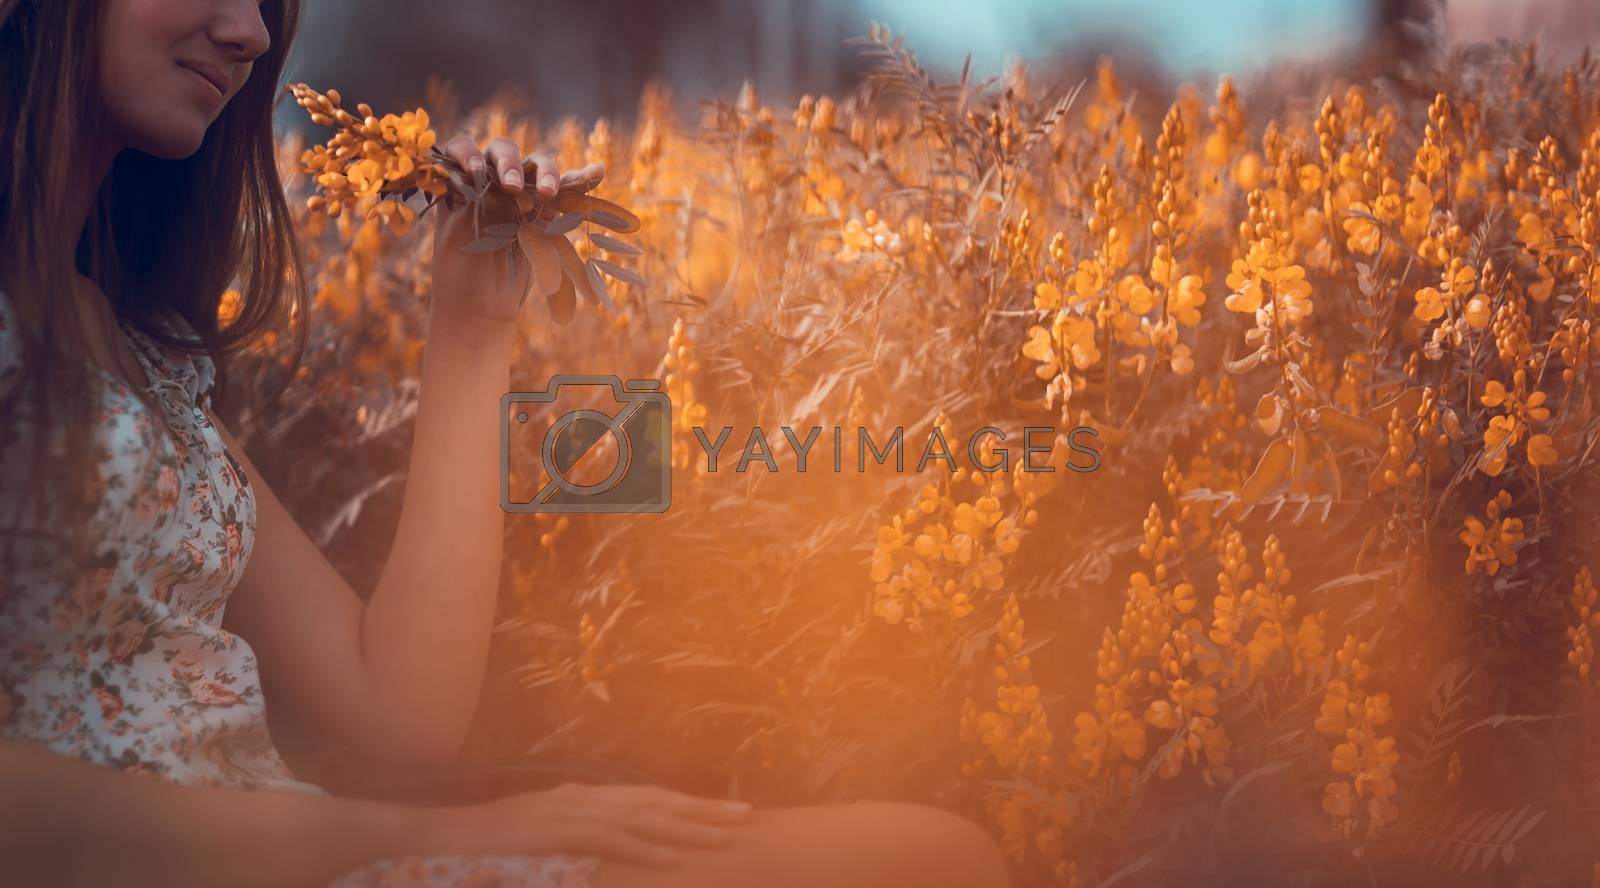 Royalty free image of Girl on the floral field by Anna_Omelchenko